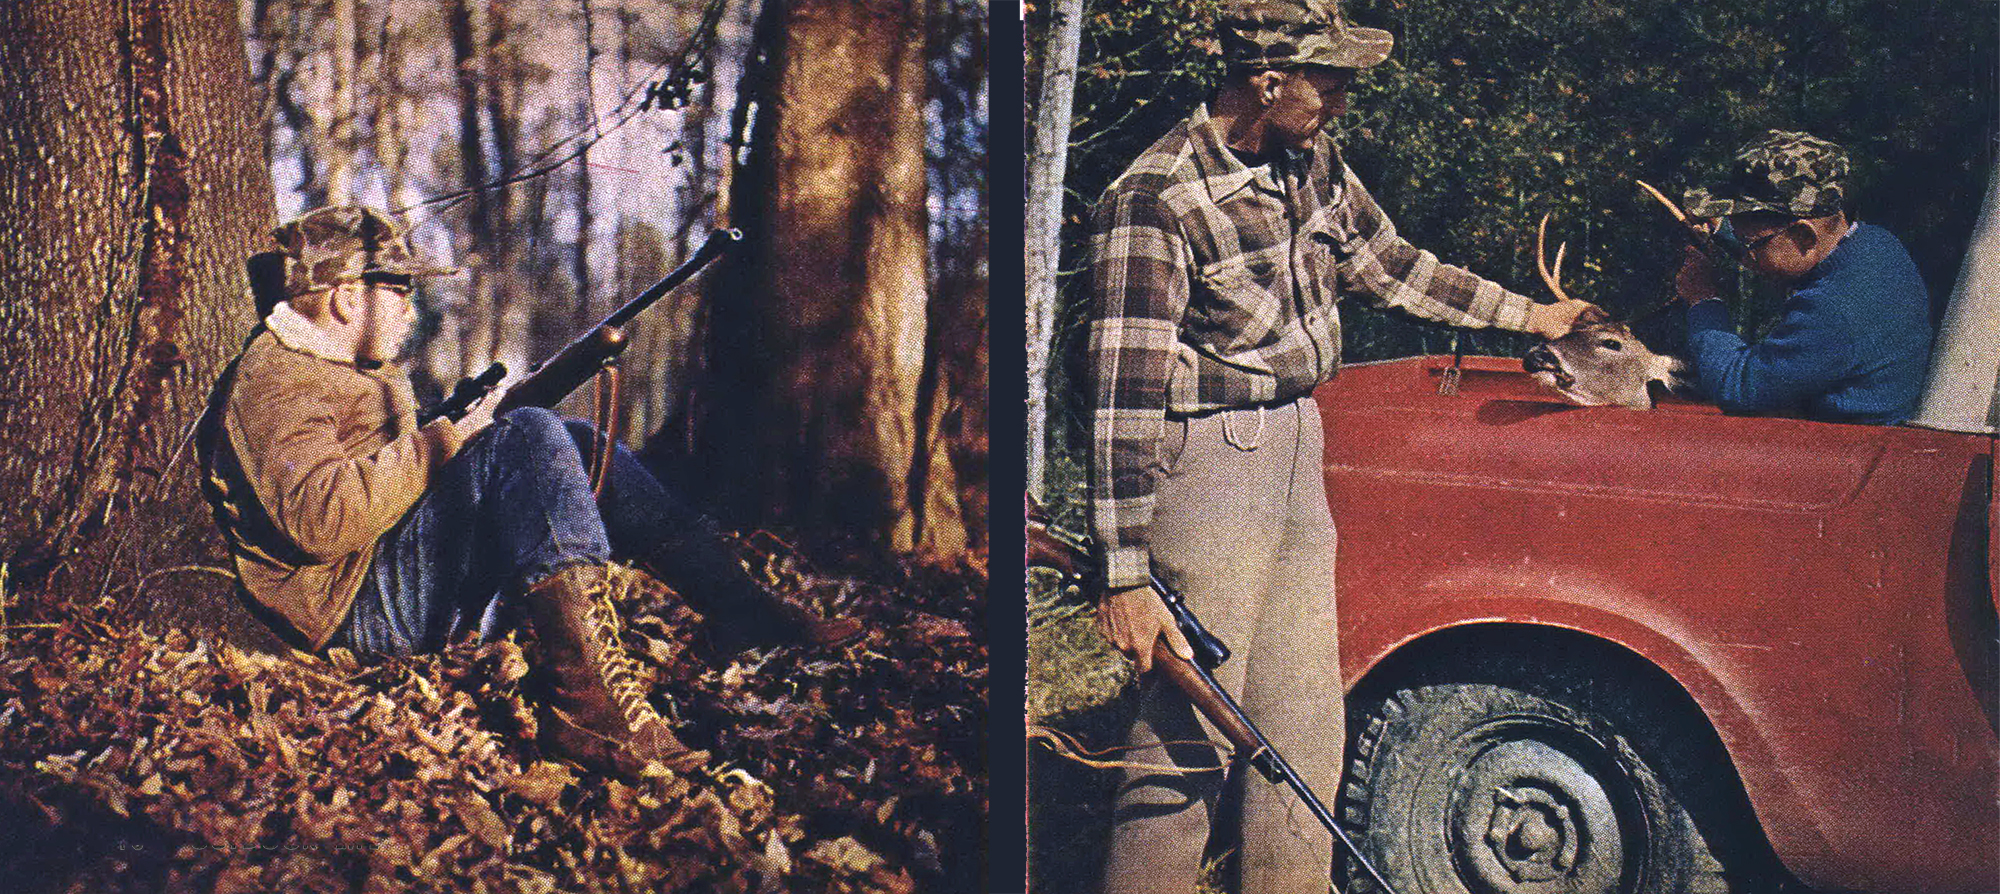 A kid's first deer hunt in a Louisiana swamp in the 1960s.